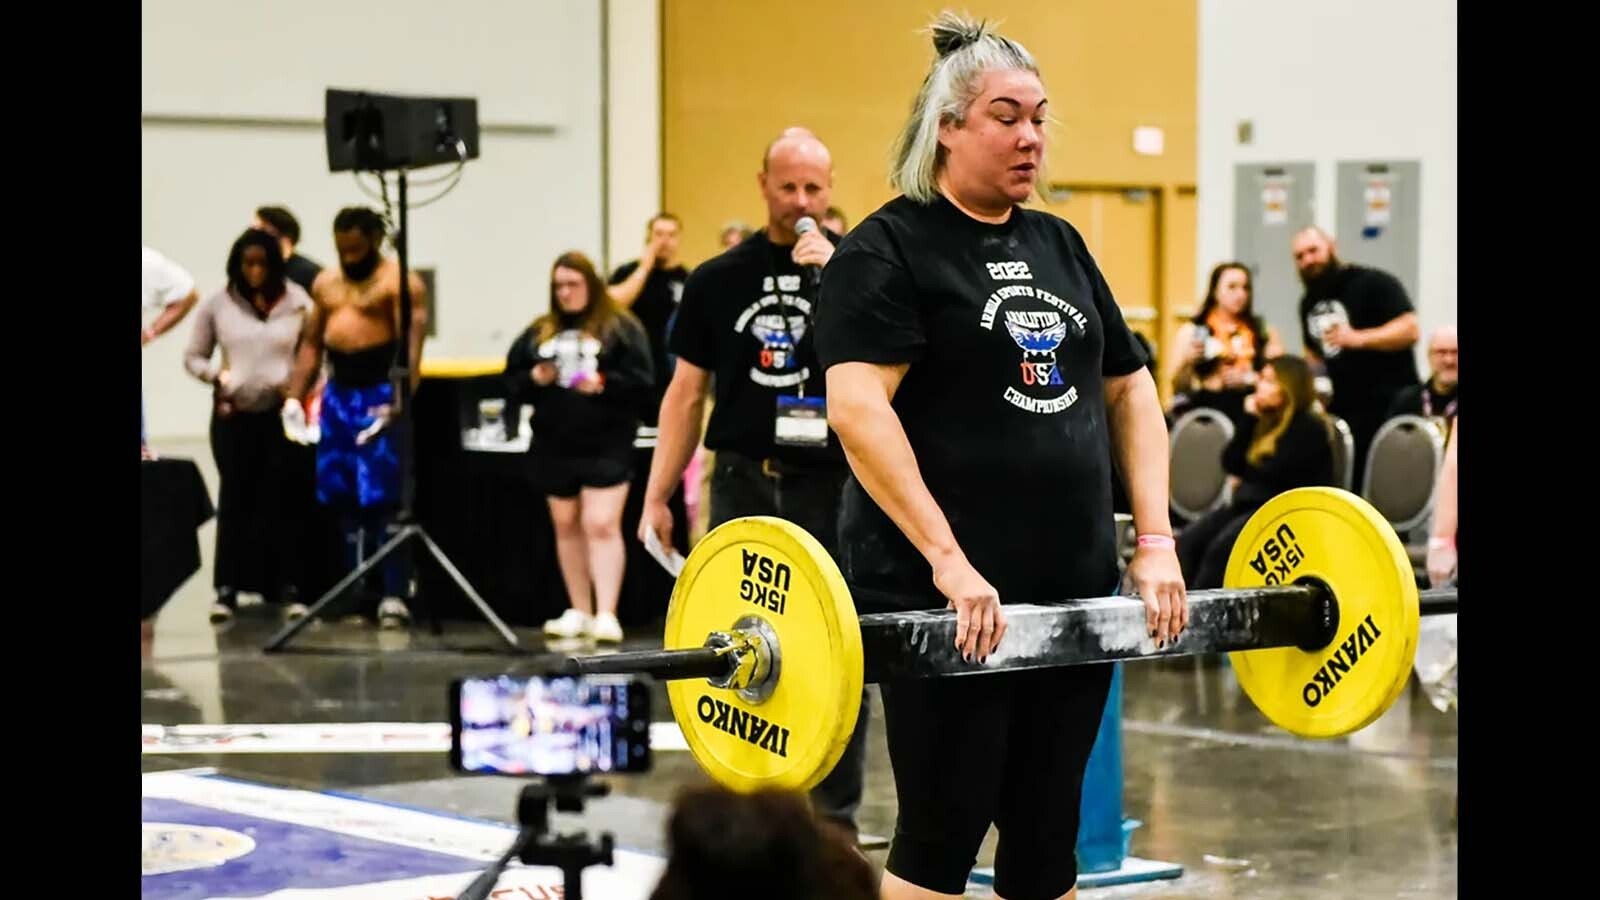 Sarah Chappelow competes at the 2022 Arnold Sports Festival.